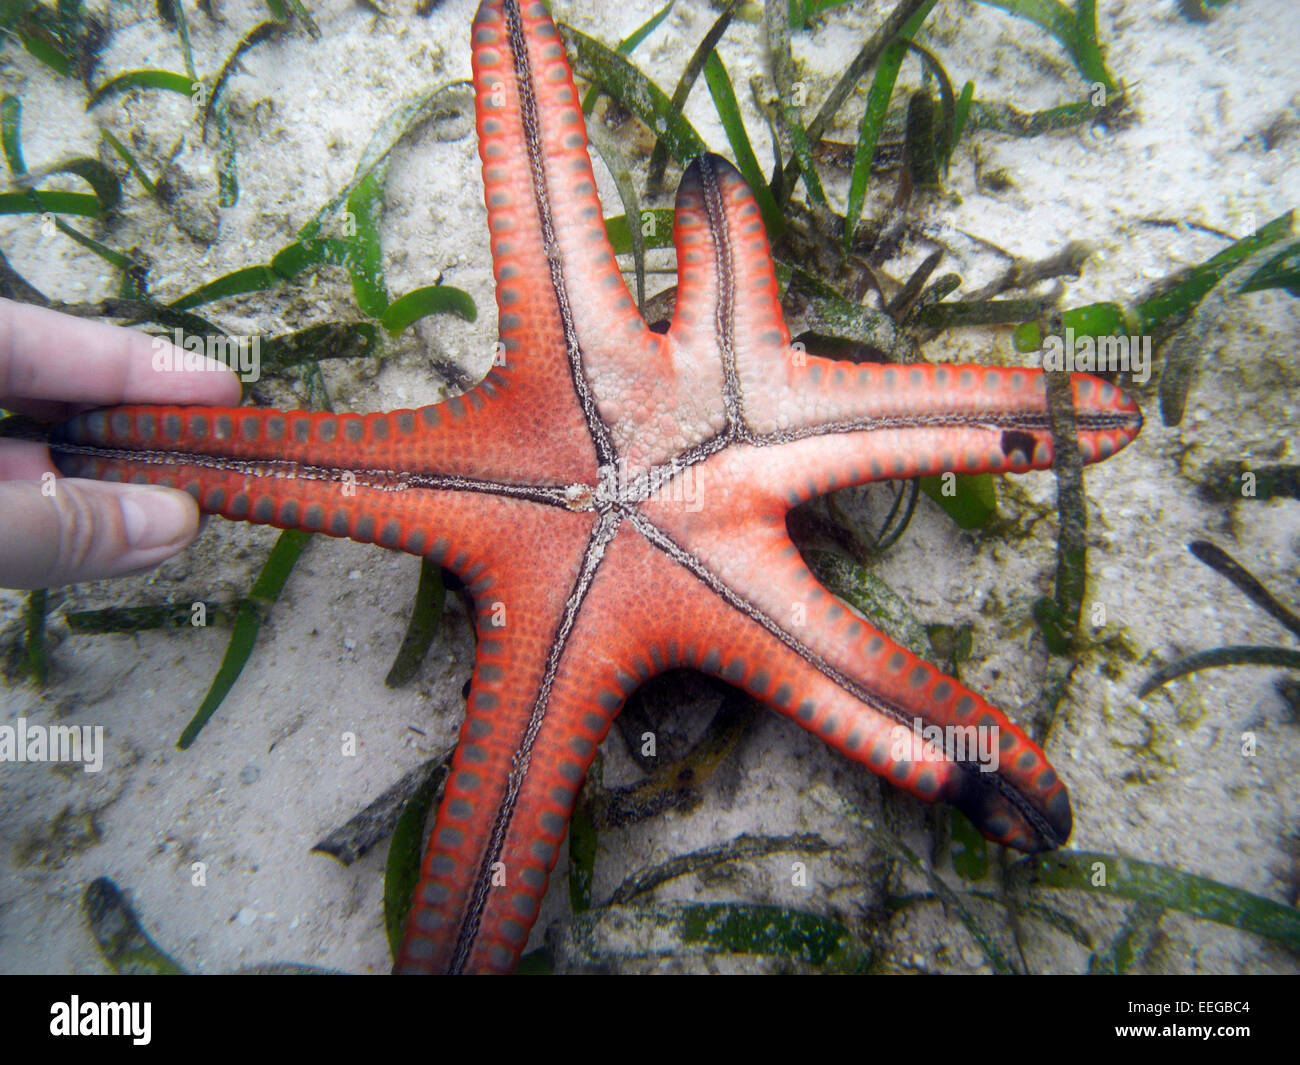 Protoreaster starfish exhibiting unusual arm morphology - perhaps recovery from a wound? Raja Ampat, Papuan province, Indonesia Stock Photo